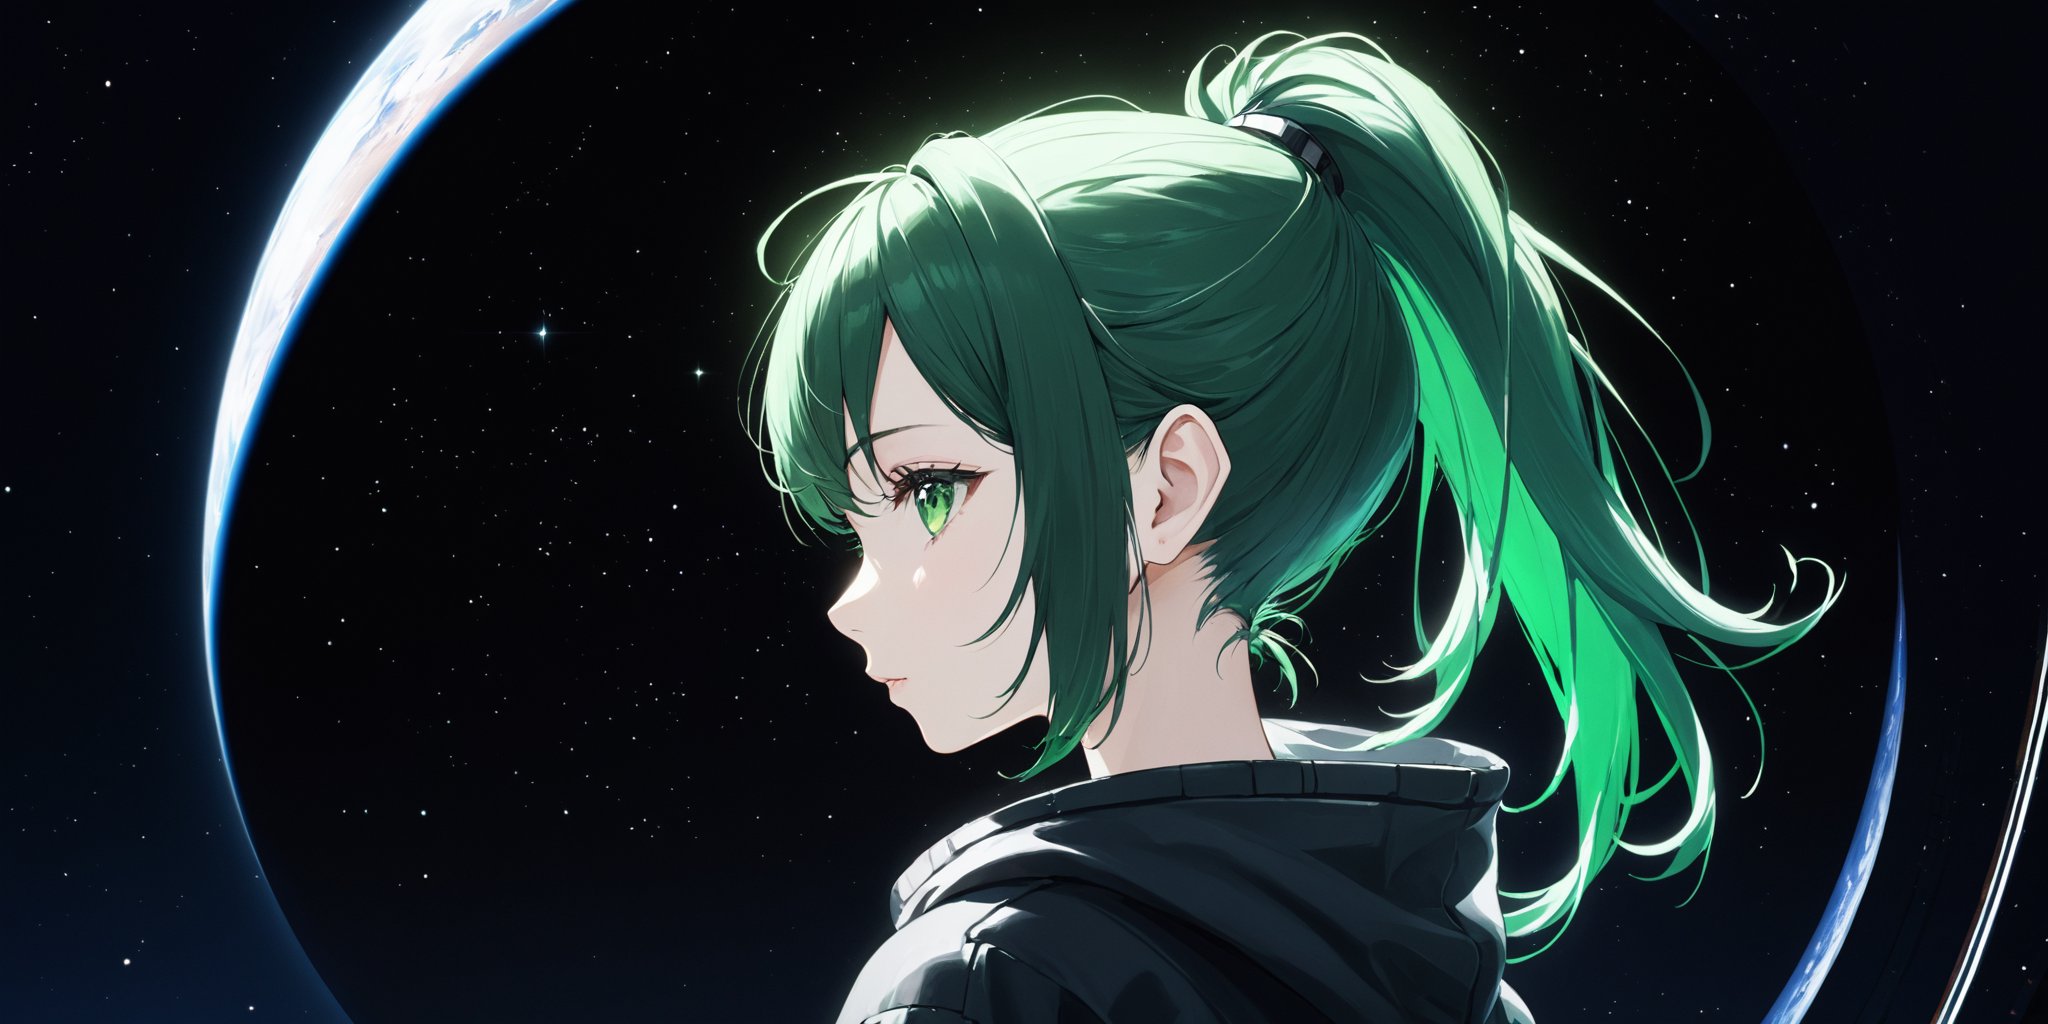 An image of A profile shot of a green haired anime woman with green eyes looking out into space forlorn at the destruction of her home planet.